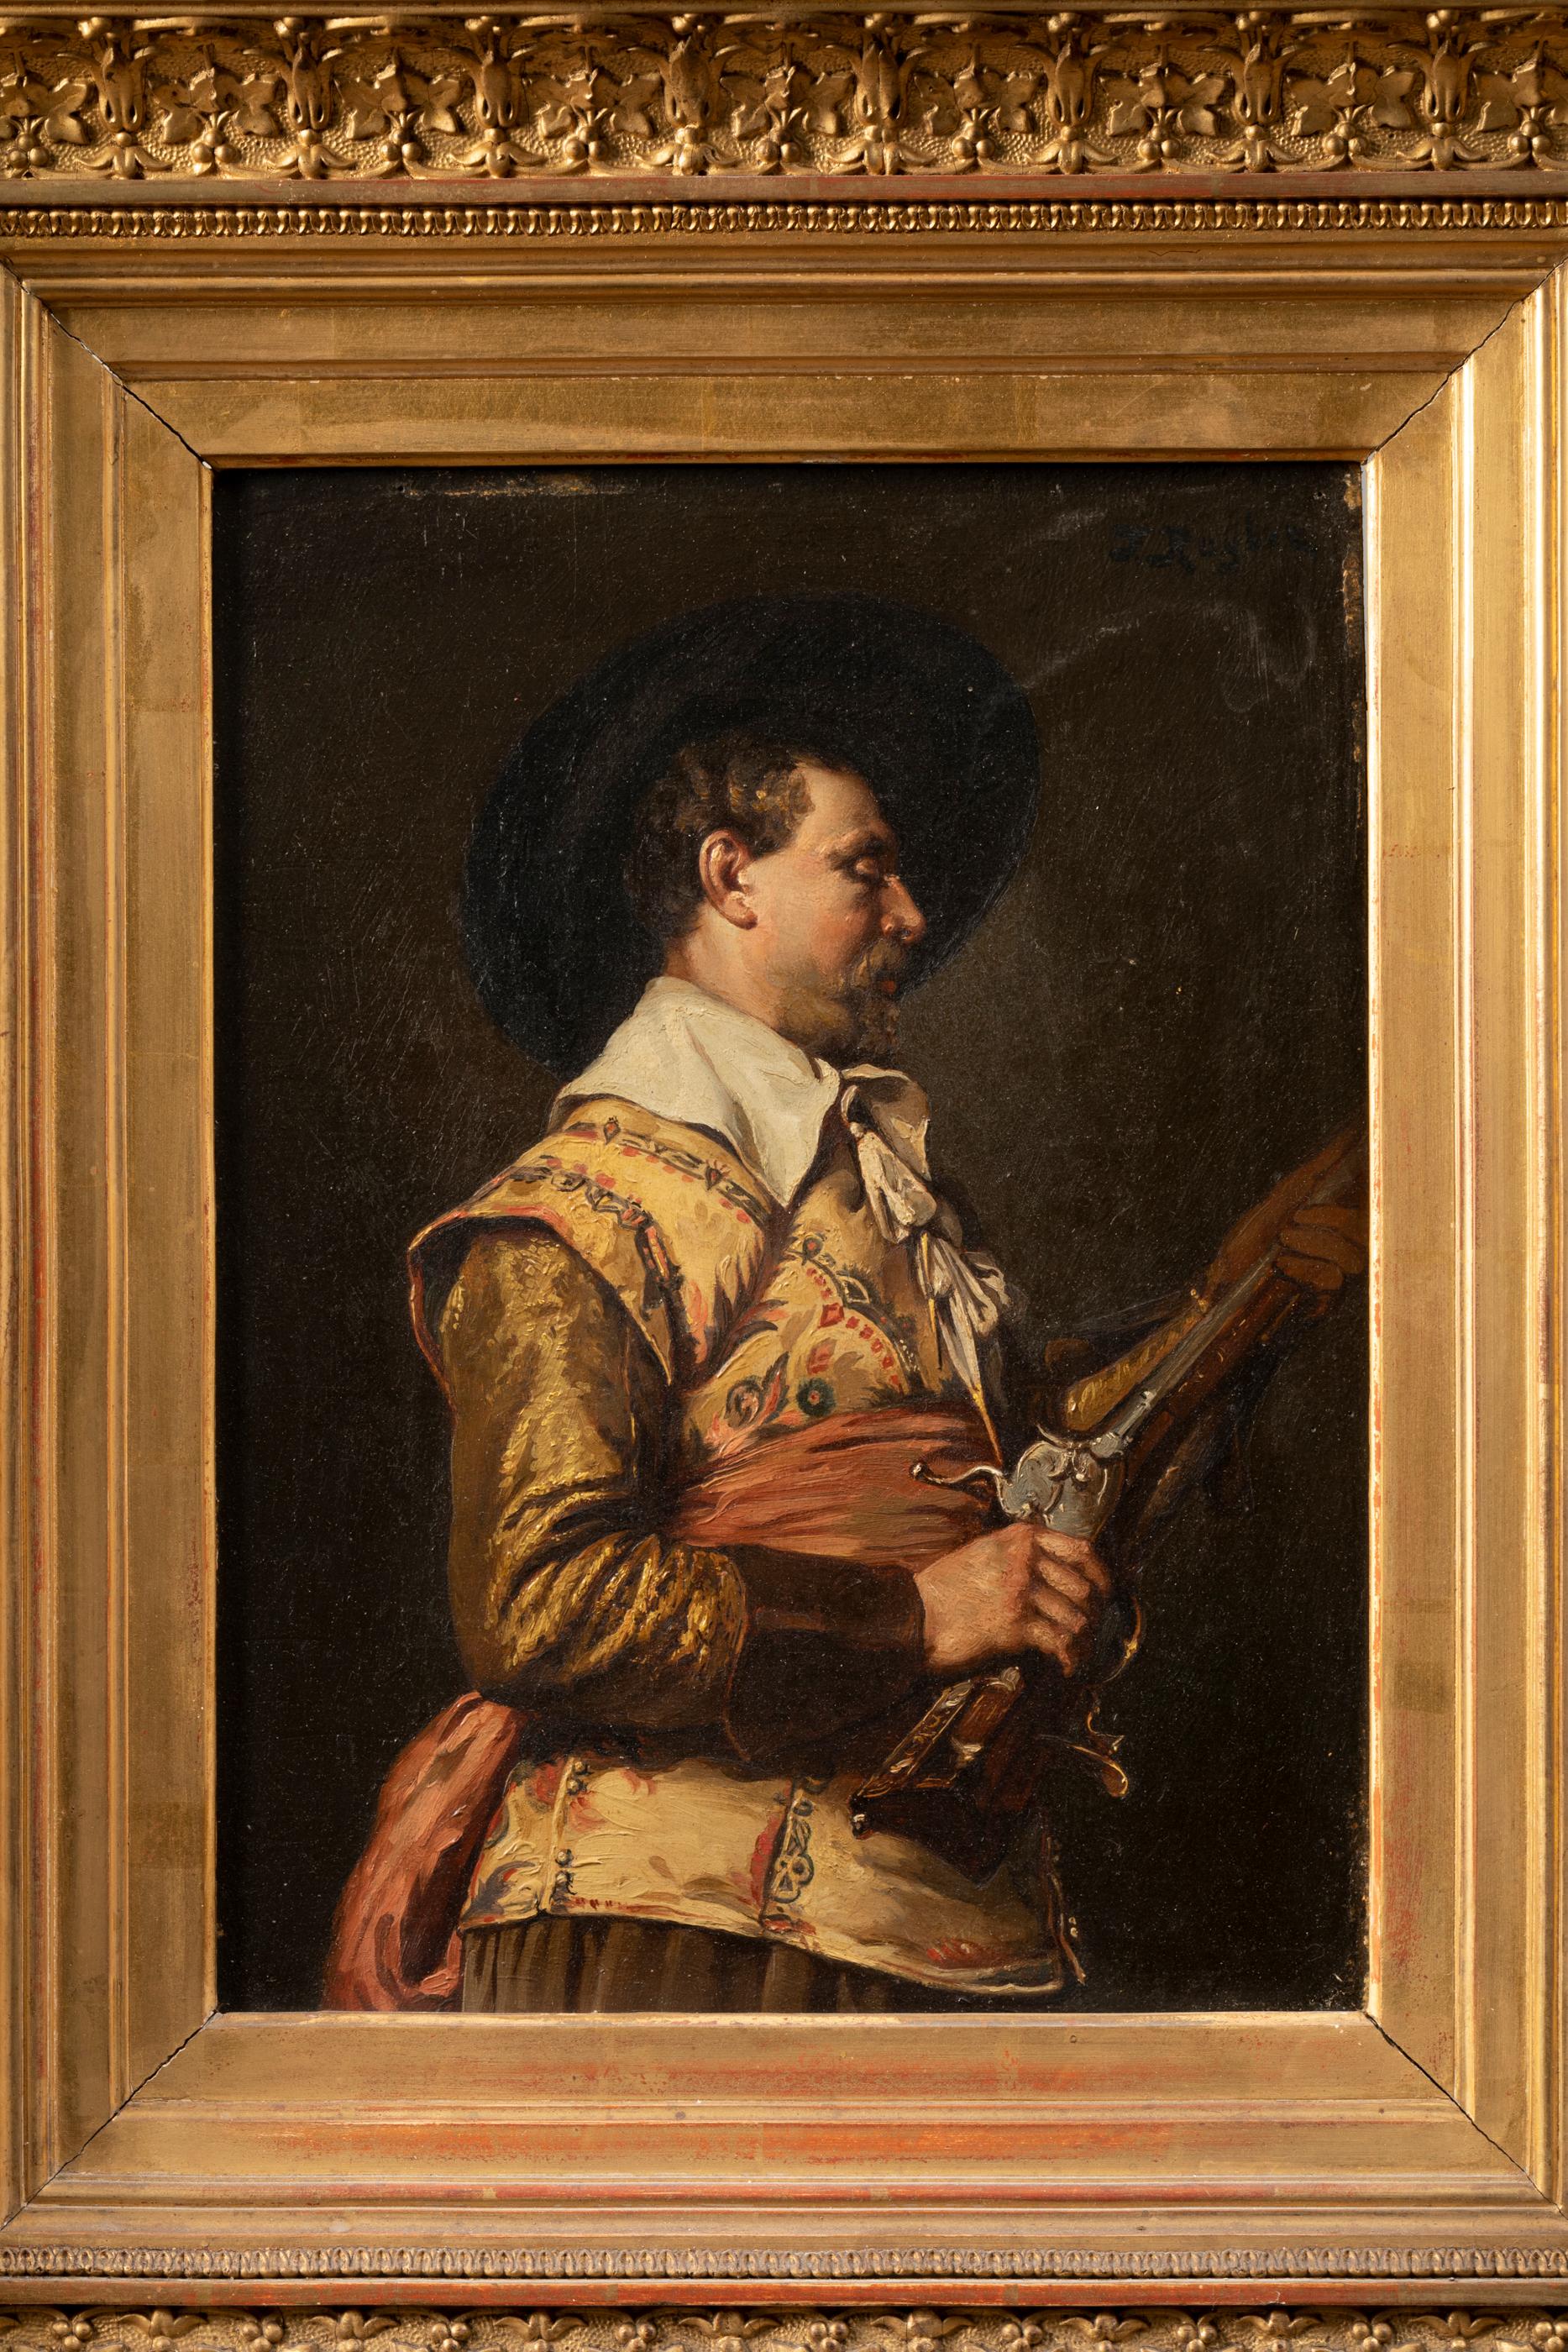 Ferdinand Roybet (Uzès, 1840 - Paris, 1920).
Musketeer with an Arquebus.
Oil on panel signed in the upper right corner.
Sizes with frame: Length 54.5 cm, width: 47 cm
Sizes without frame: Height 31 cm, width 23.5 cm
Original frame from the 19th